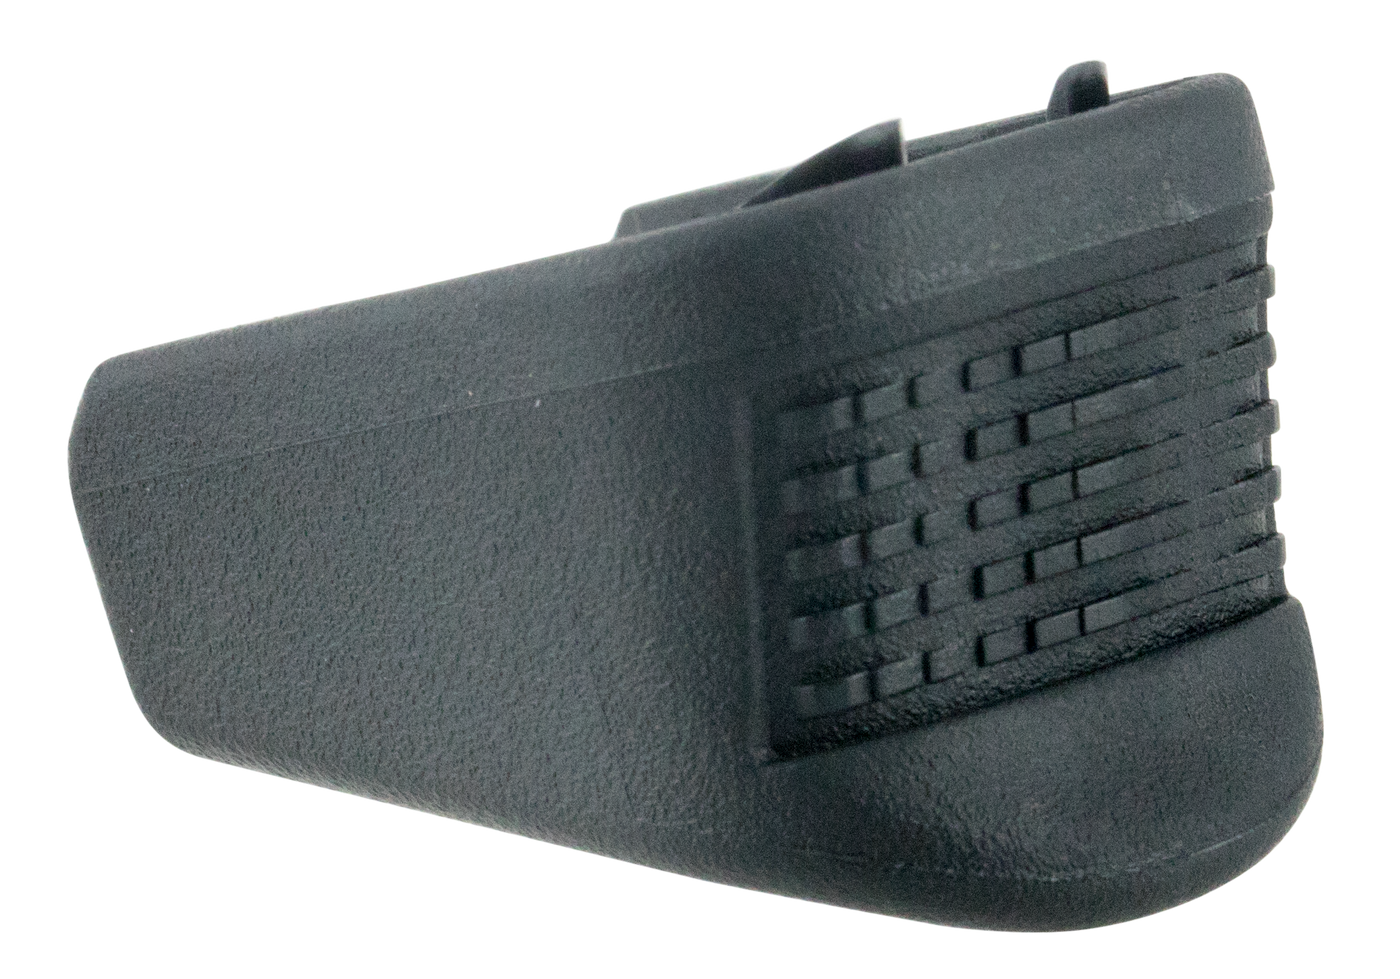 Pearce Grip Extension Plus For - Glock Full Size